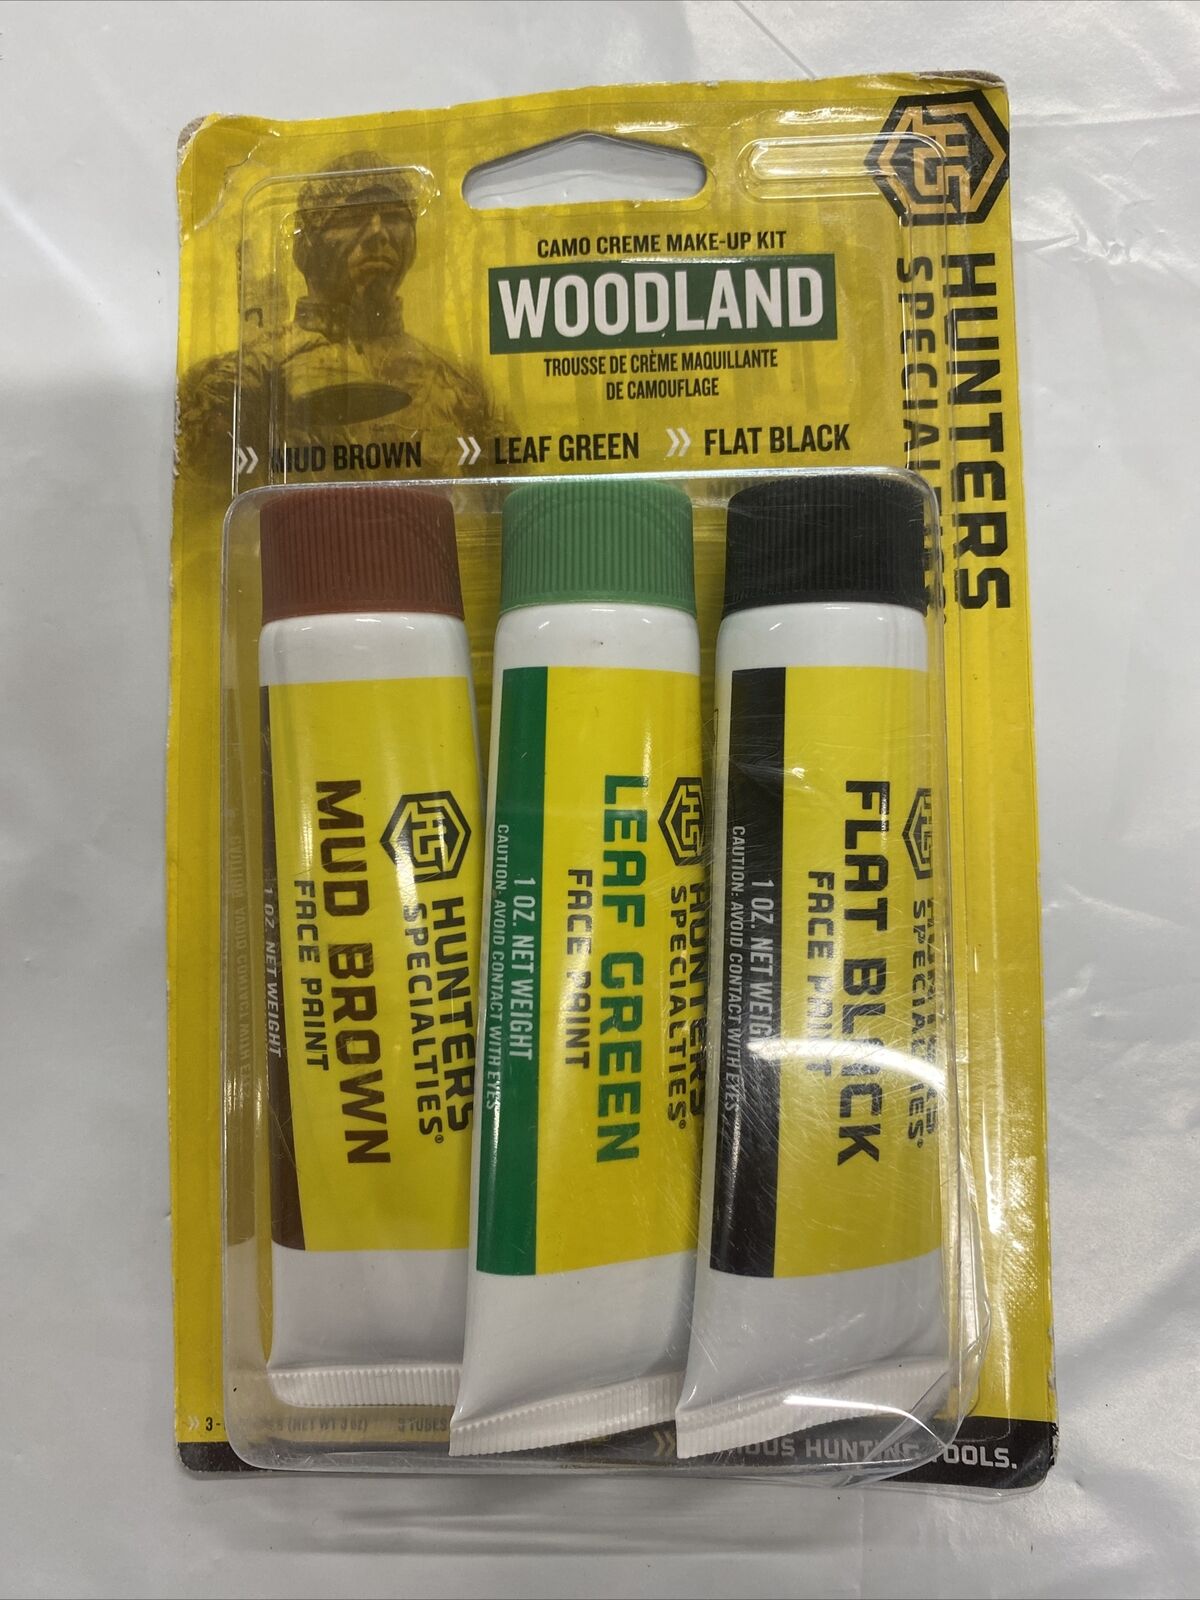 Hunters Specialties Camo Creme Make-Up Kit Woodland 3-pack